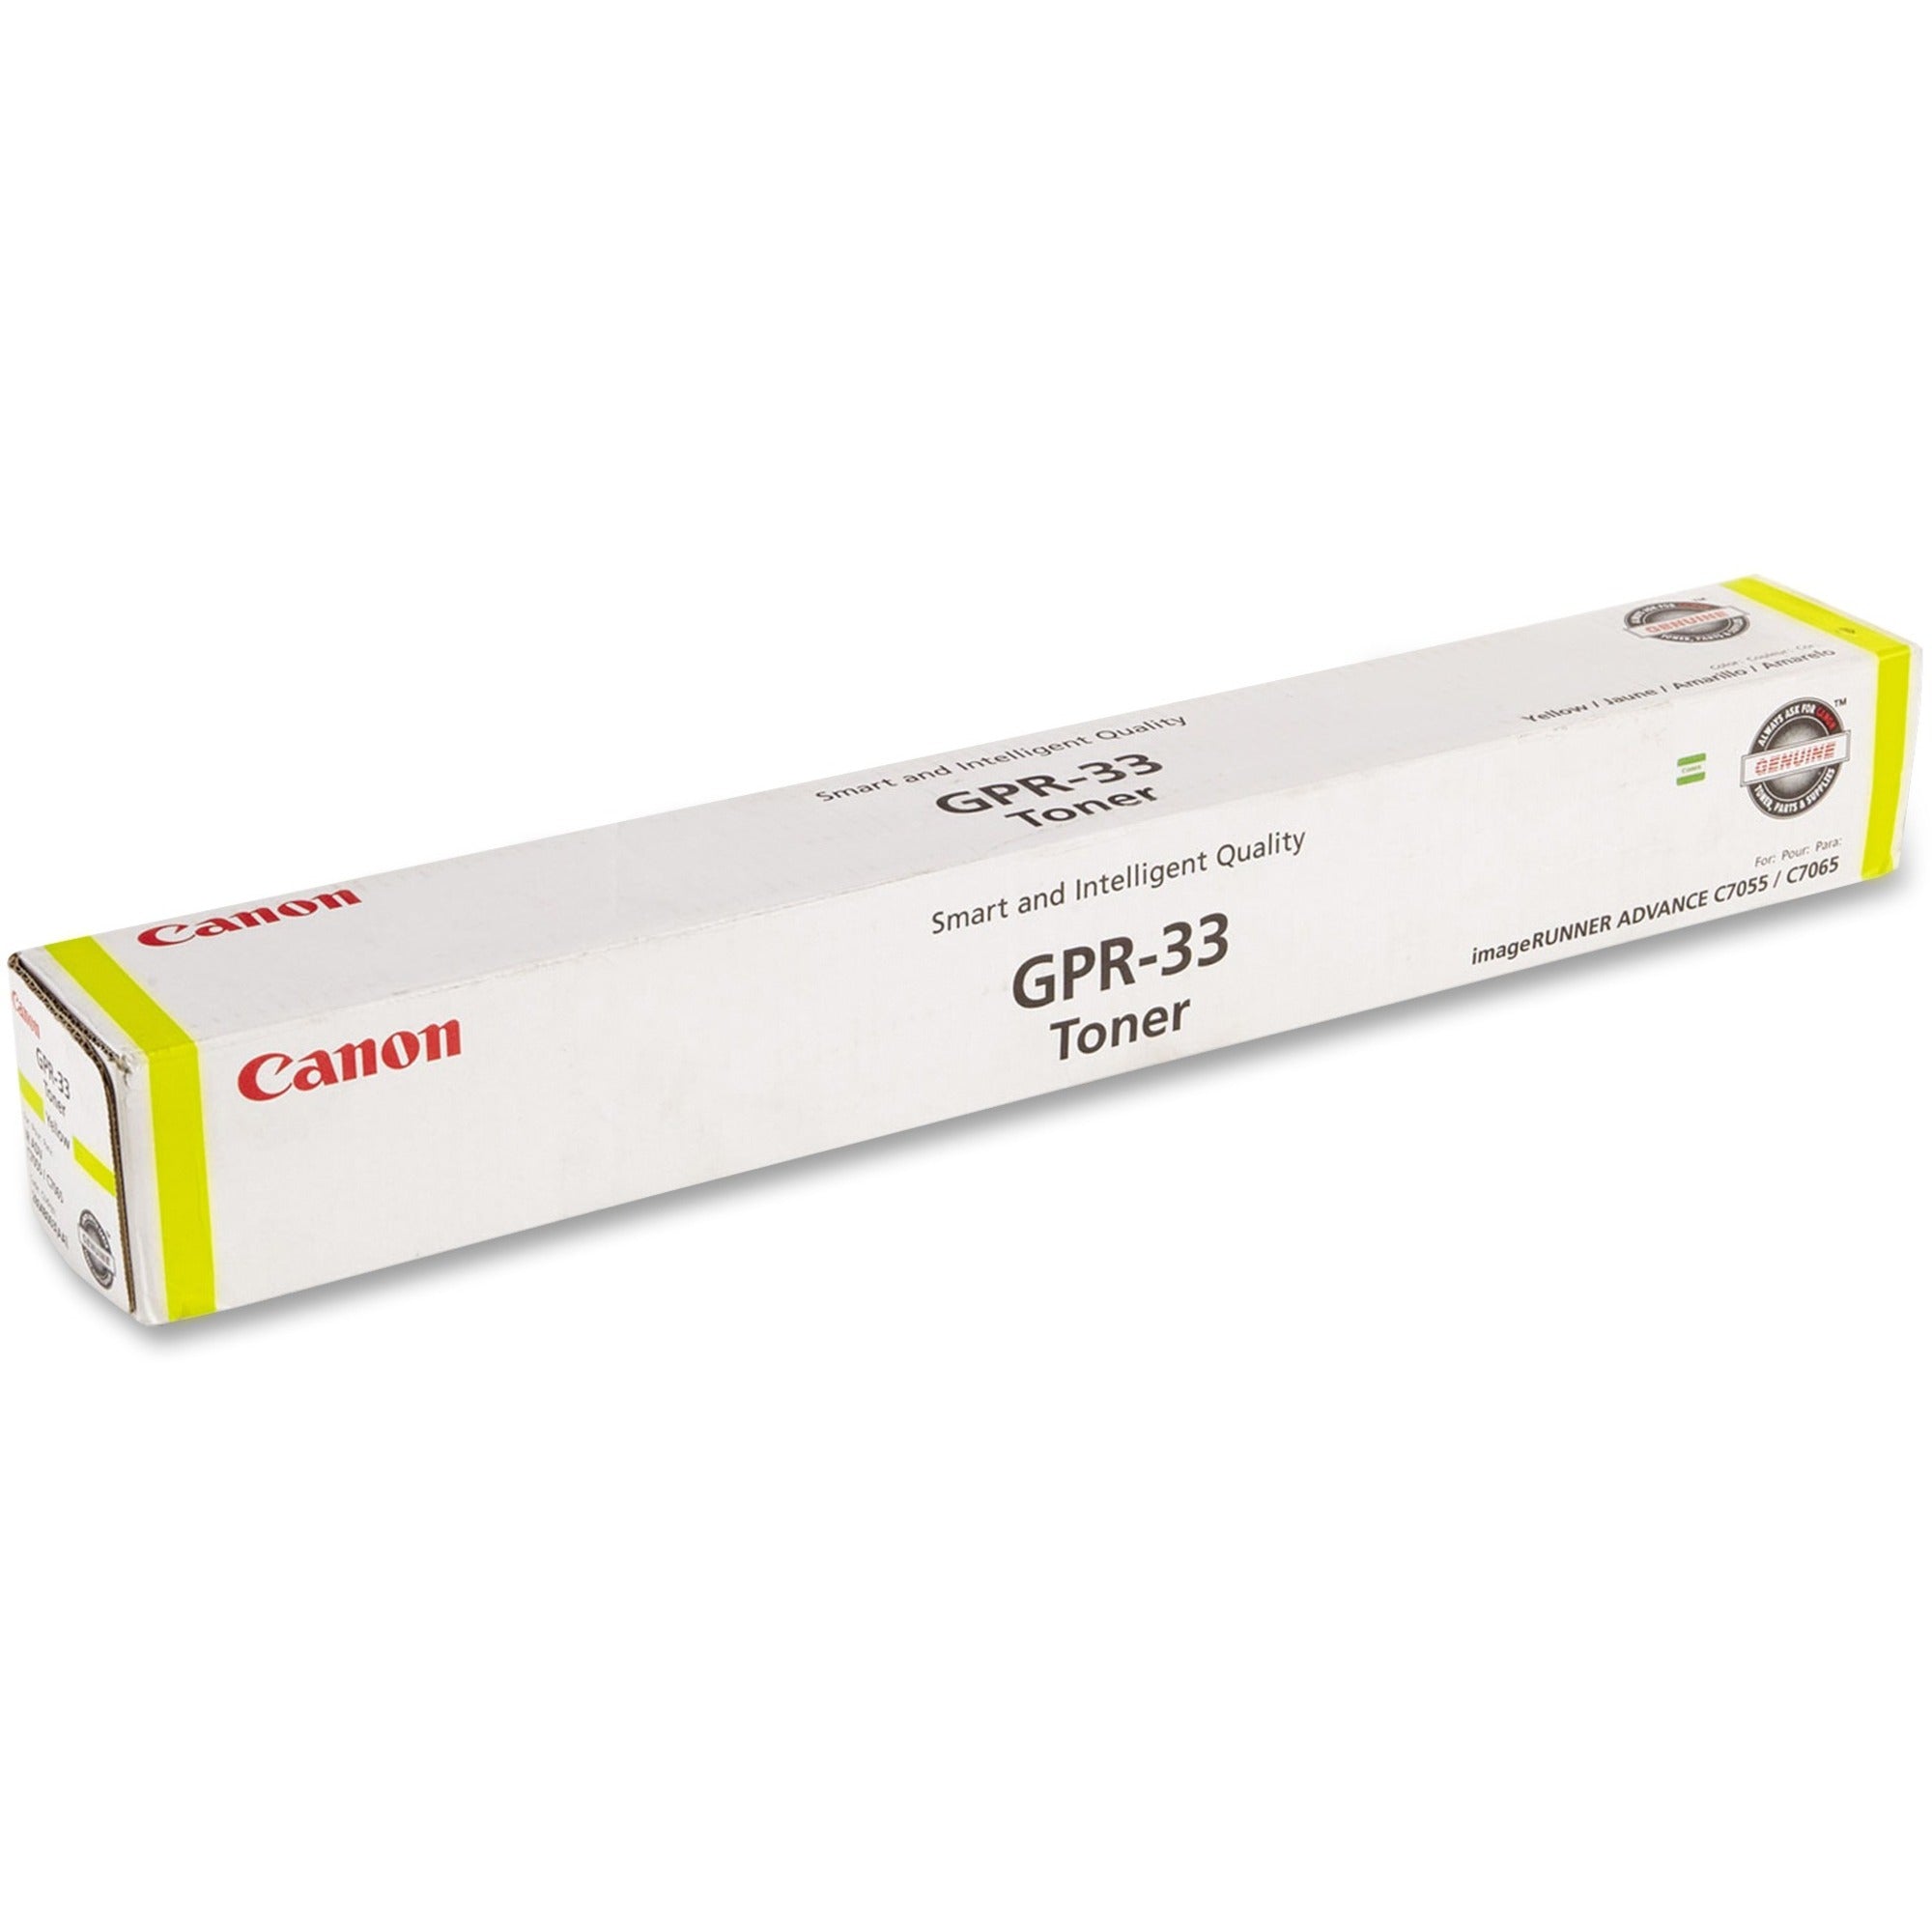 canon-gpr-33-original-toner-cartridge-laser-52000-pages-yellow-1-each_cnm2804b003aa - 1